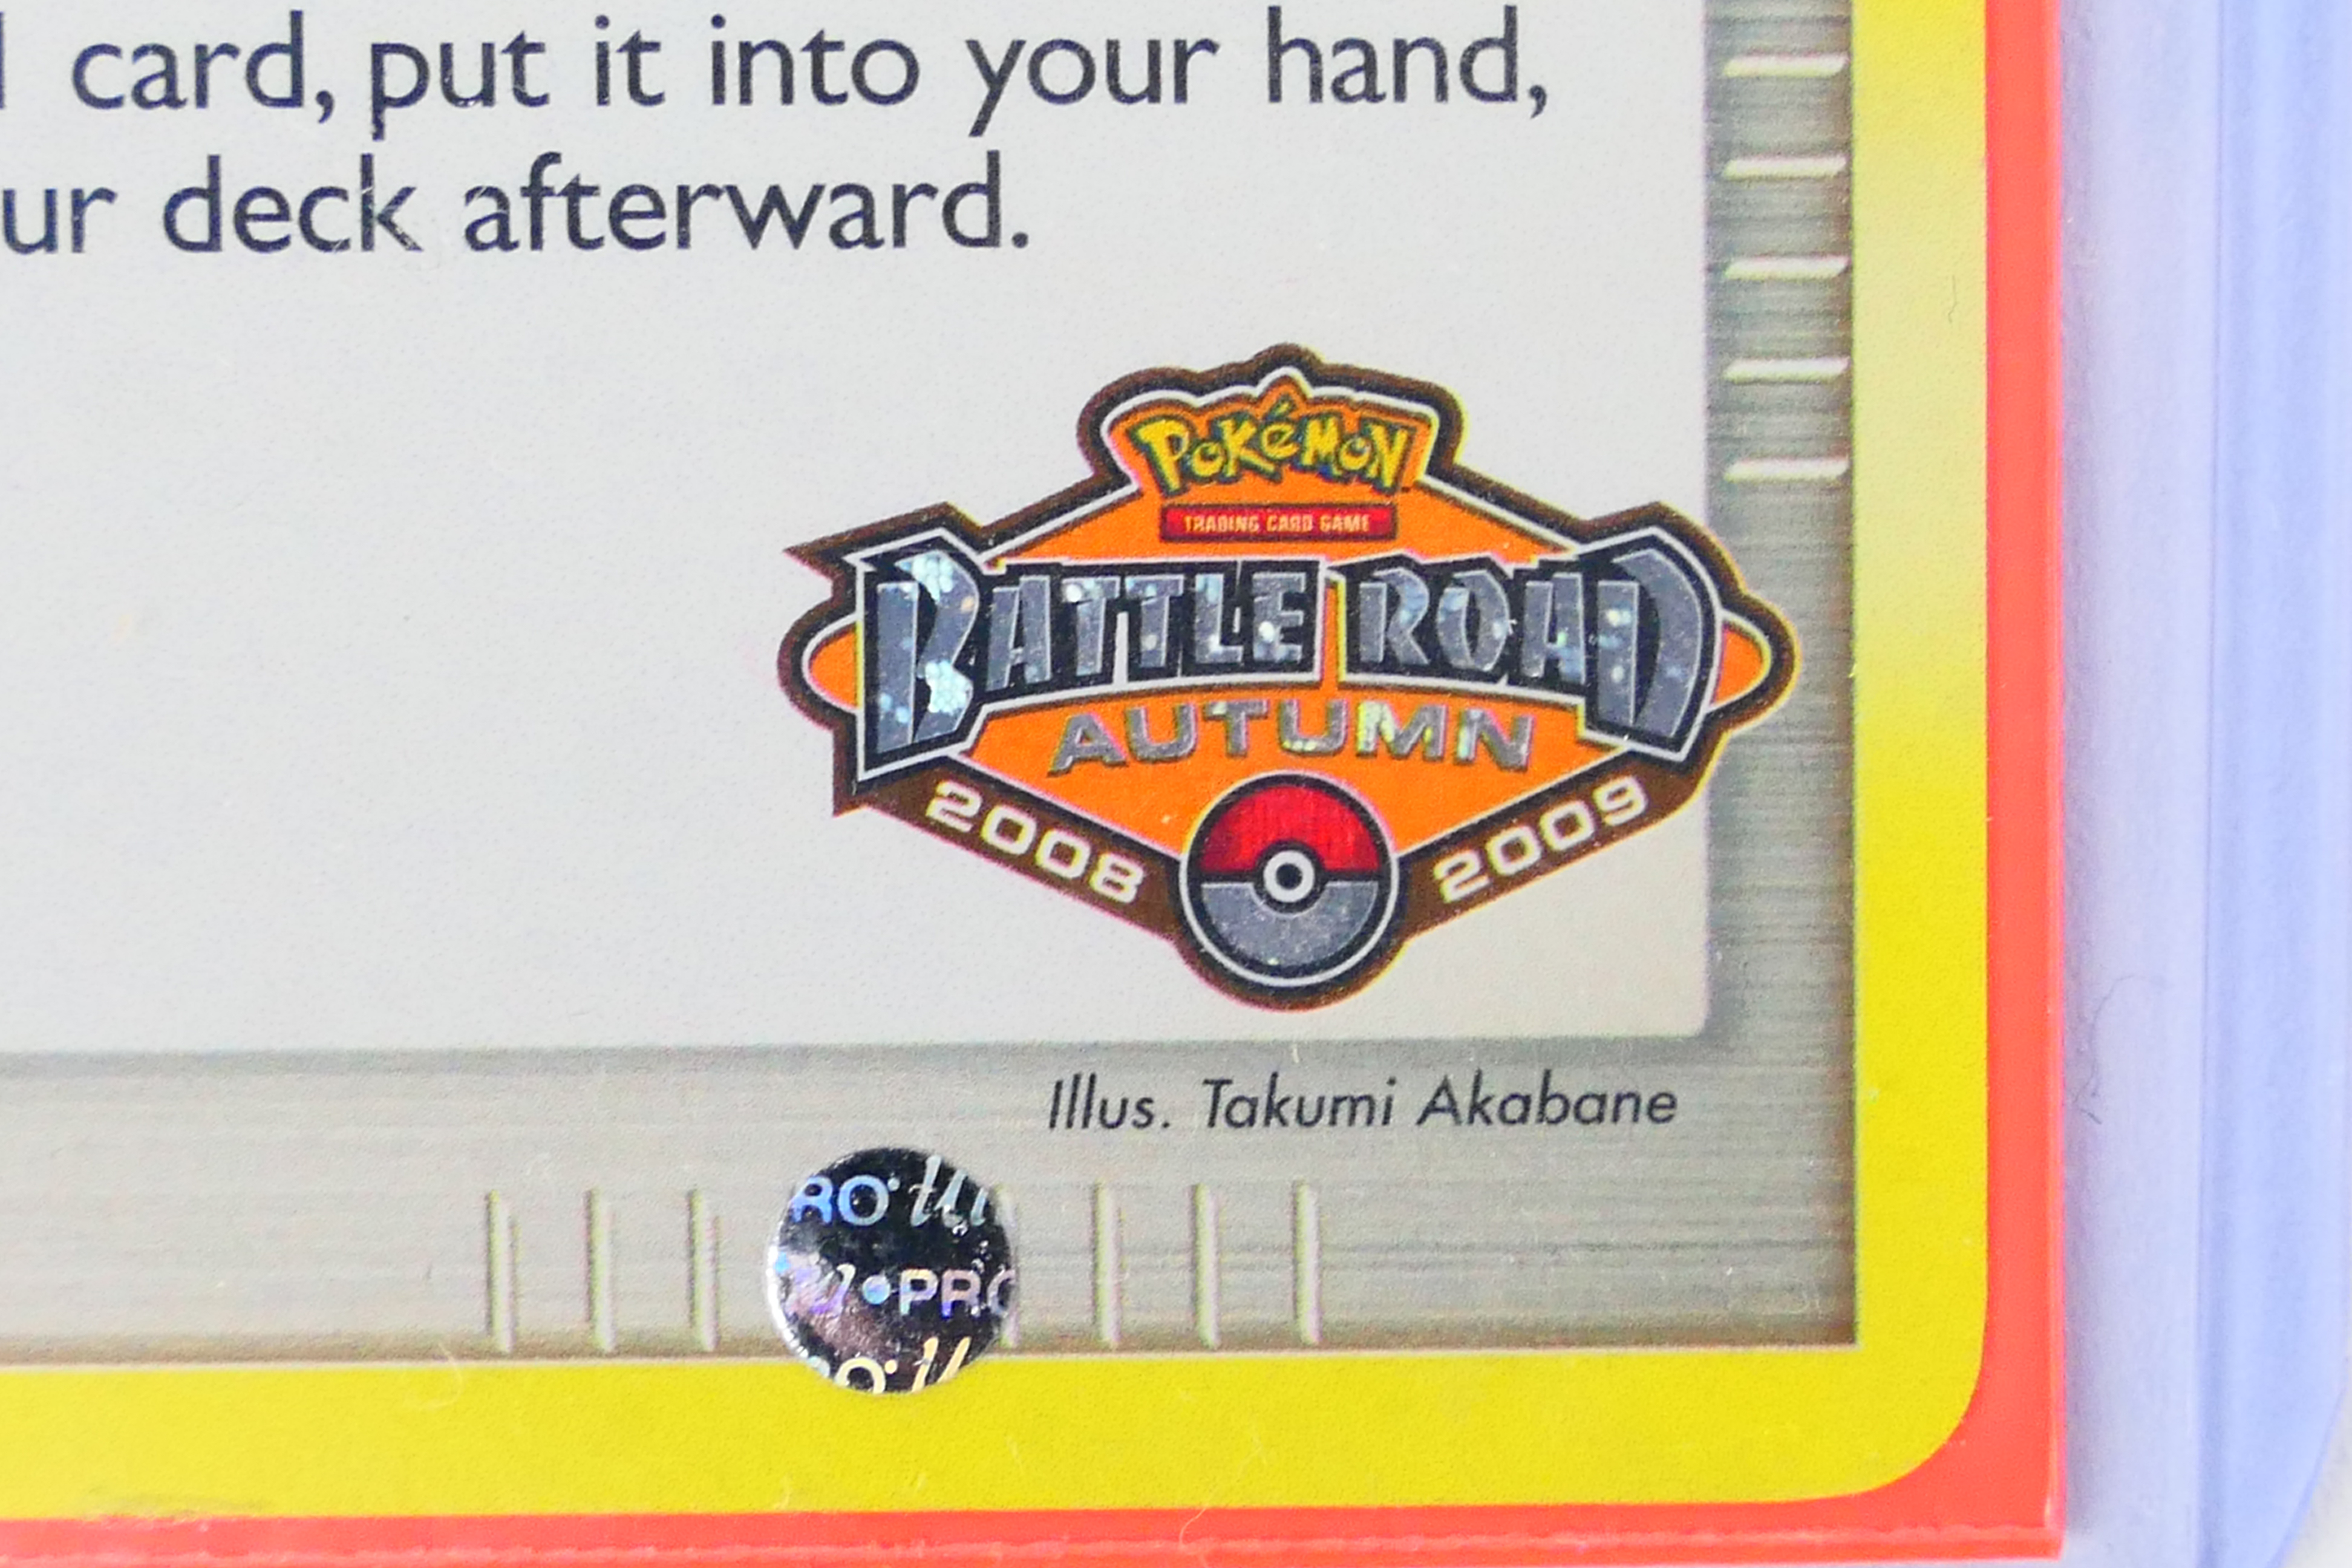 Pokemon - A Pokemon Battle Road Victory Medal Trainer Card for Autumn 2008 / 2009, - Image 2 of 5